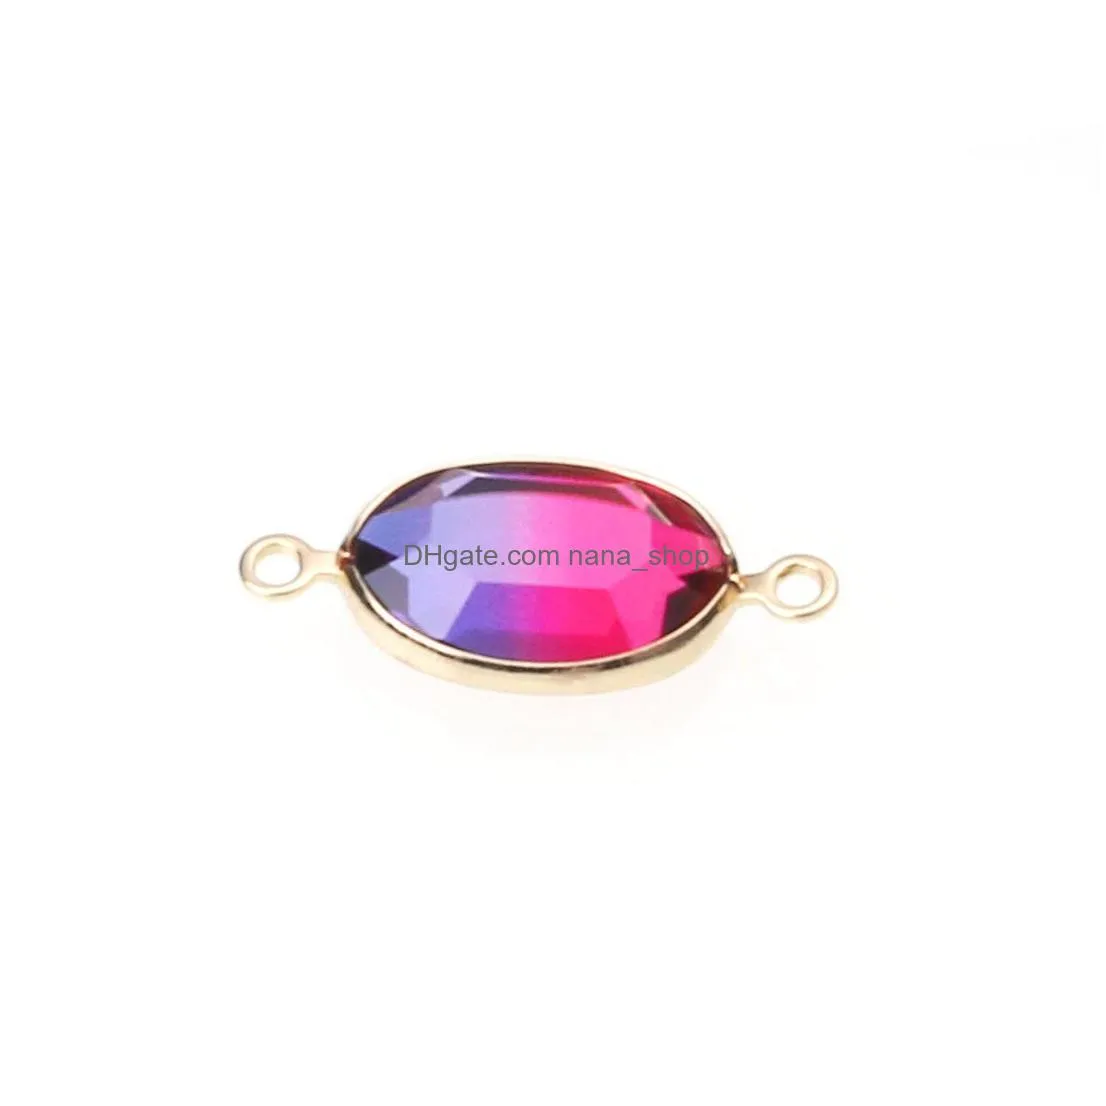  gradient color oval glass pendant charm for bracelet necklace high quality charm for diy jewelry making